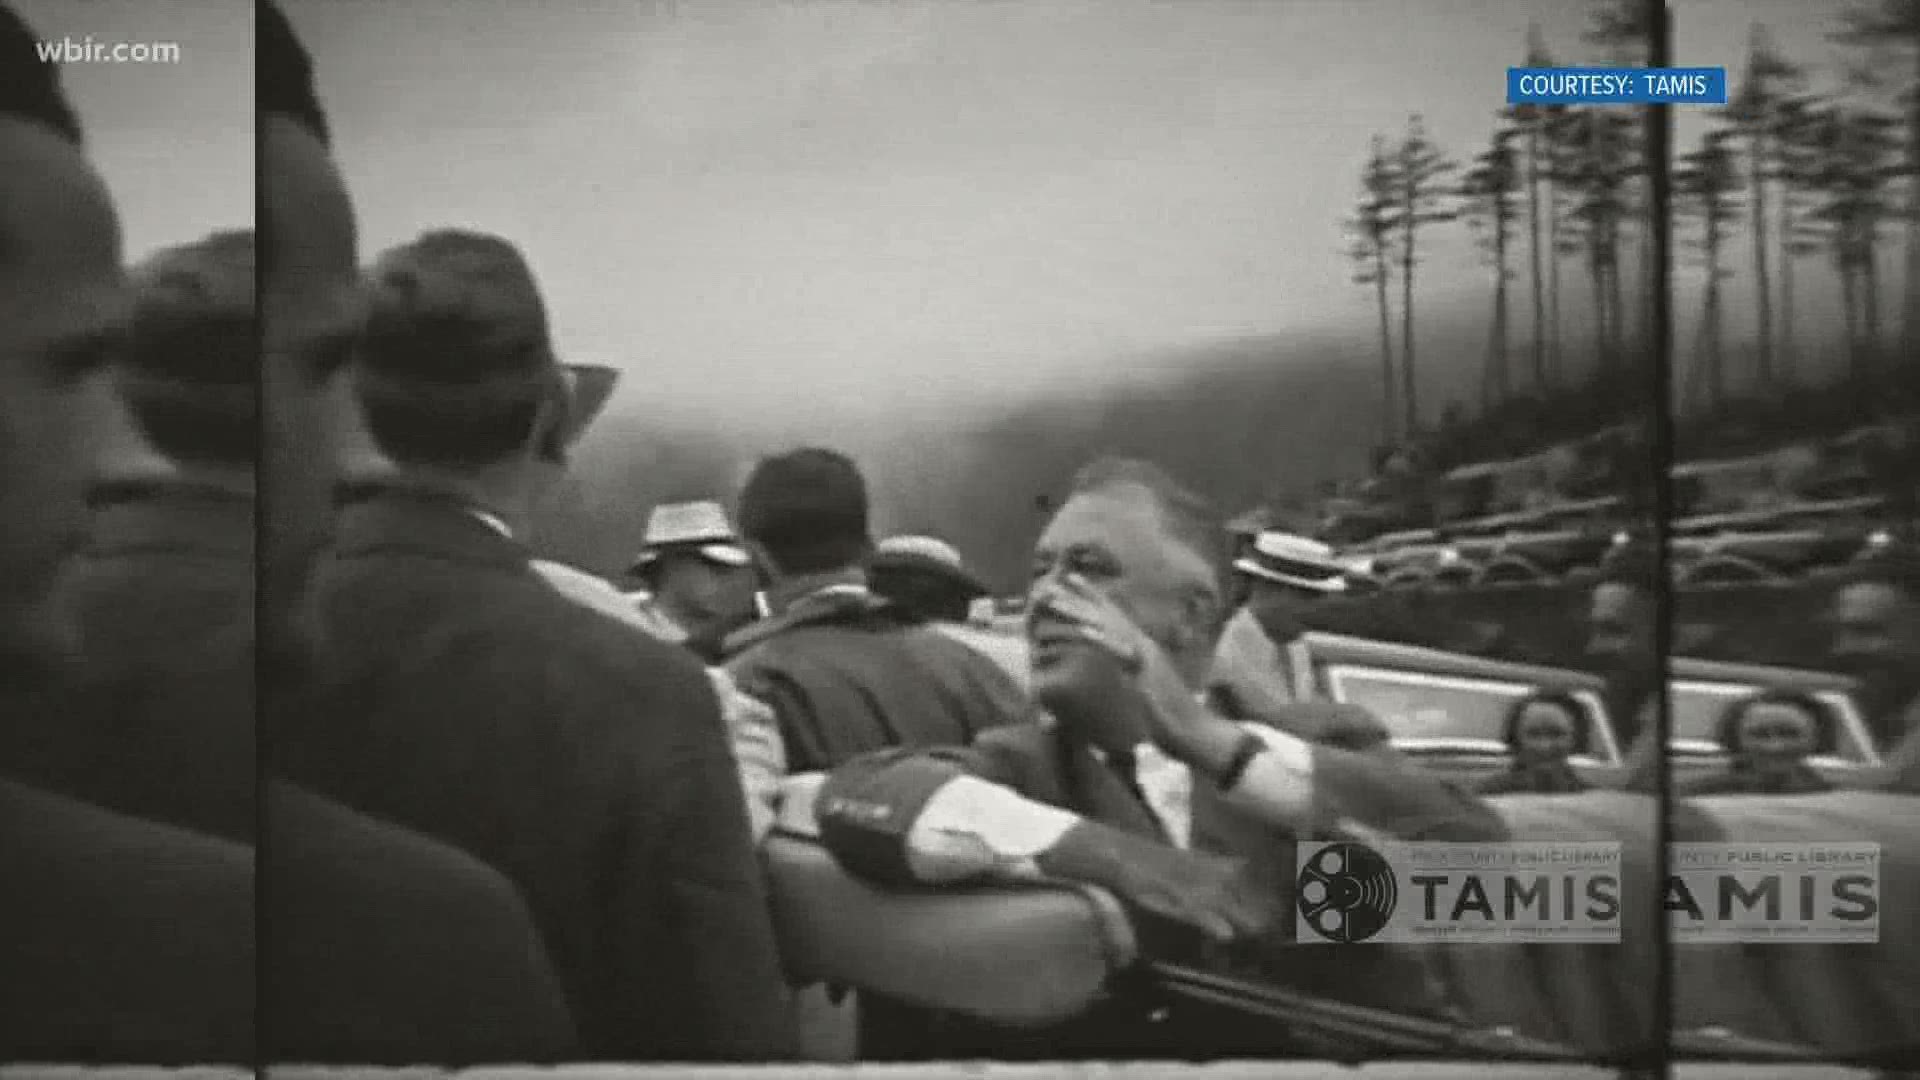 On Sept. 2, 1940, President Franklin D. Roosevelt held a ceremony to officially make the Smokies a national park.